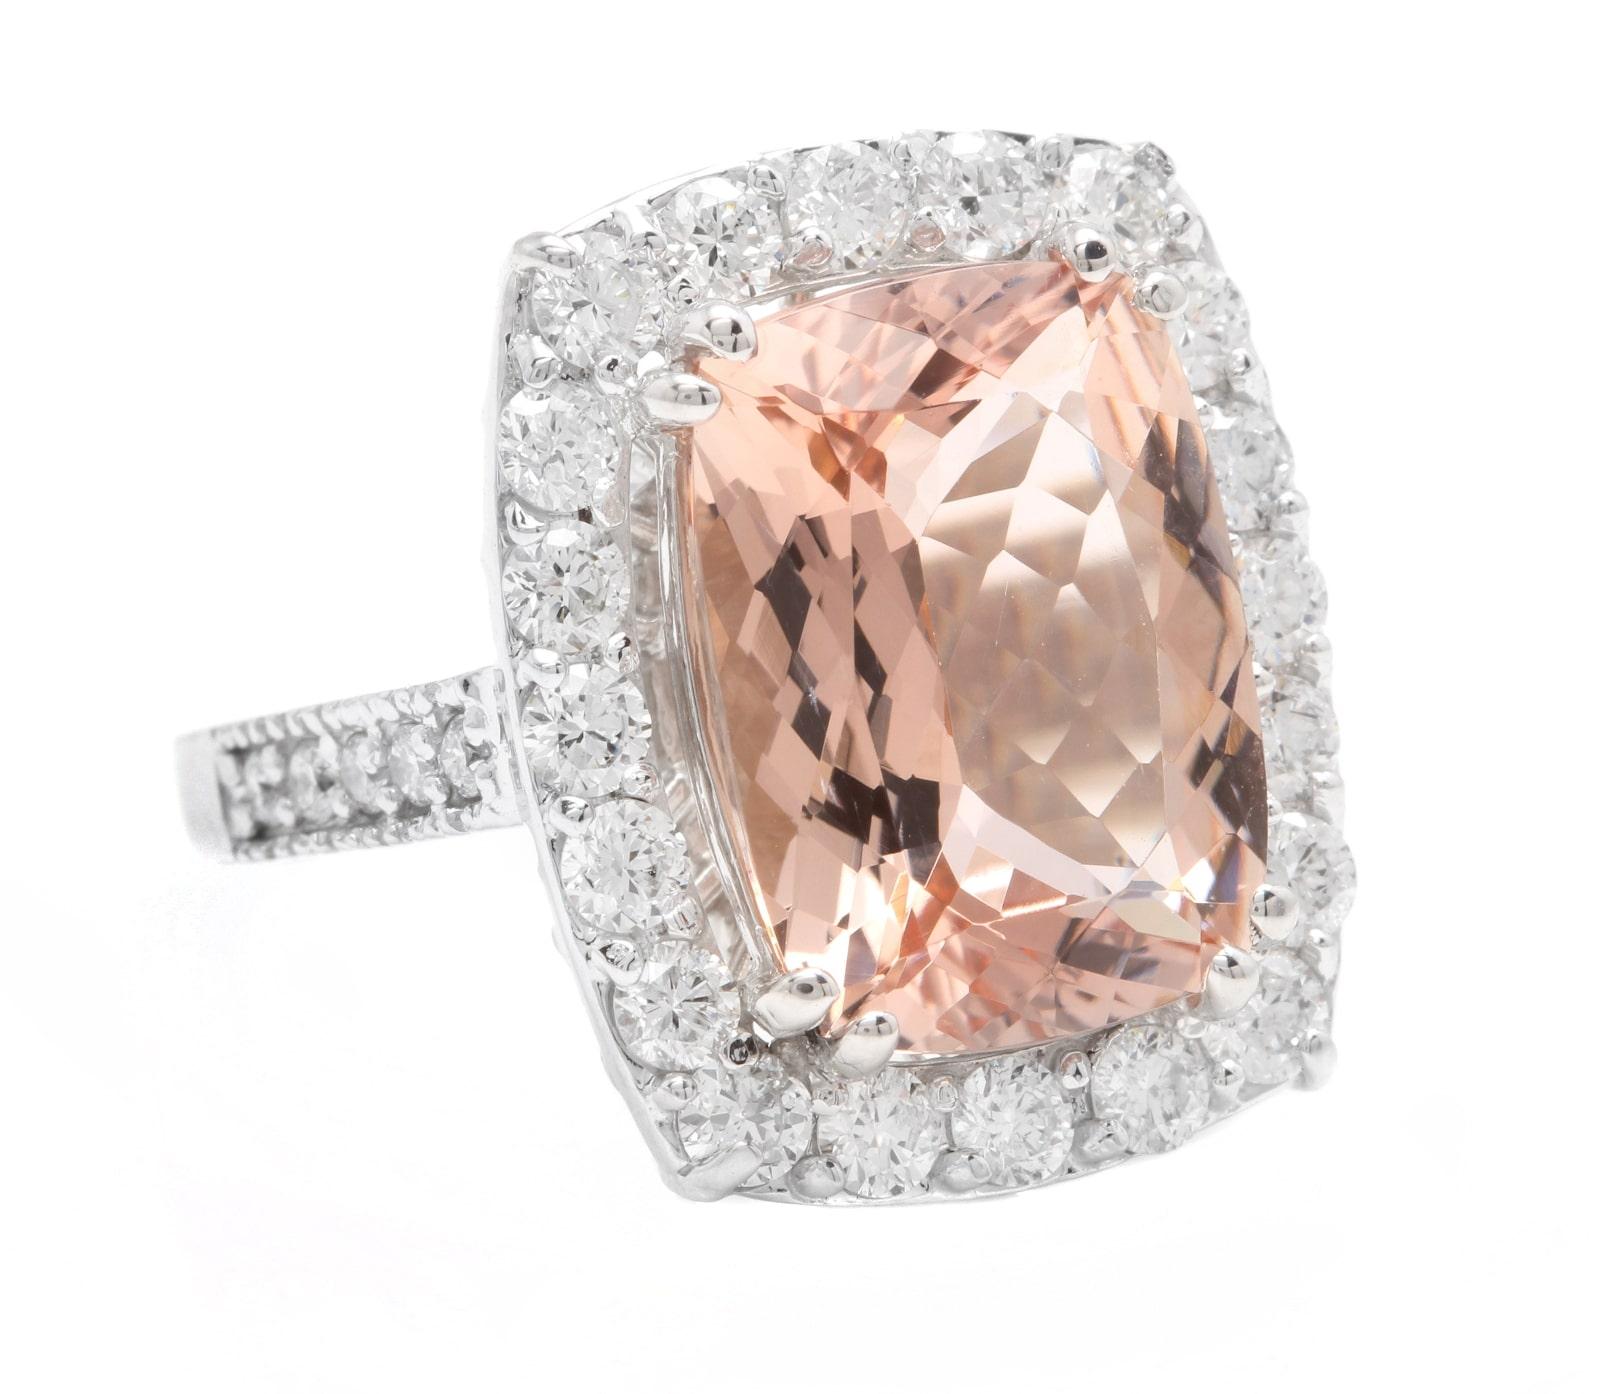 8.20 Carats Exquisite Natural Morganite and Diamond 14K Solid White Gold Ring

Suggested Replacement Value: $7,000.00

Total Natural Cushion Morganite Weights: Approx. 7.00 Carats

Morganite Measures: Approx. 14.00 x 10.00mm

Natural Round Diamonds